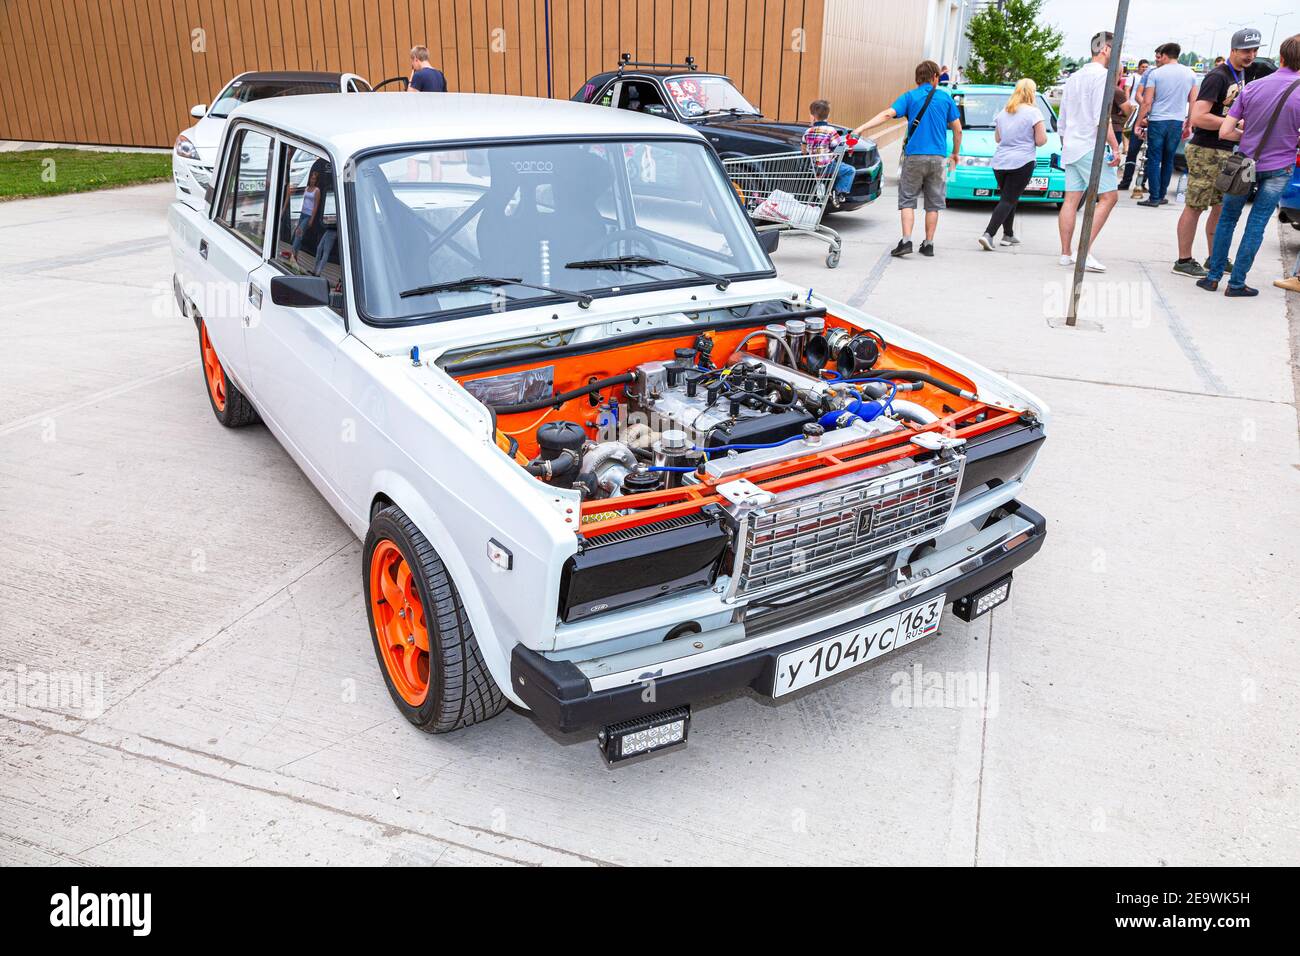 Samara, Russia - May 19, 2018: Russian automobile Lada-2107 with tuned turbo car engine, under the hood of a vehicle Stock Photo